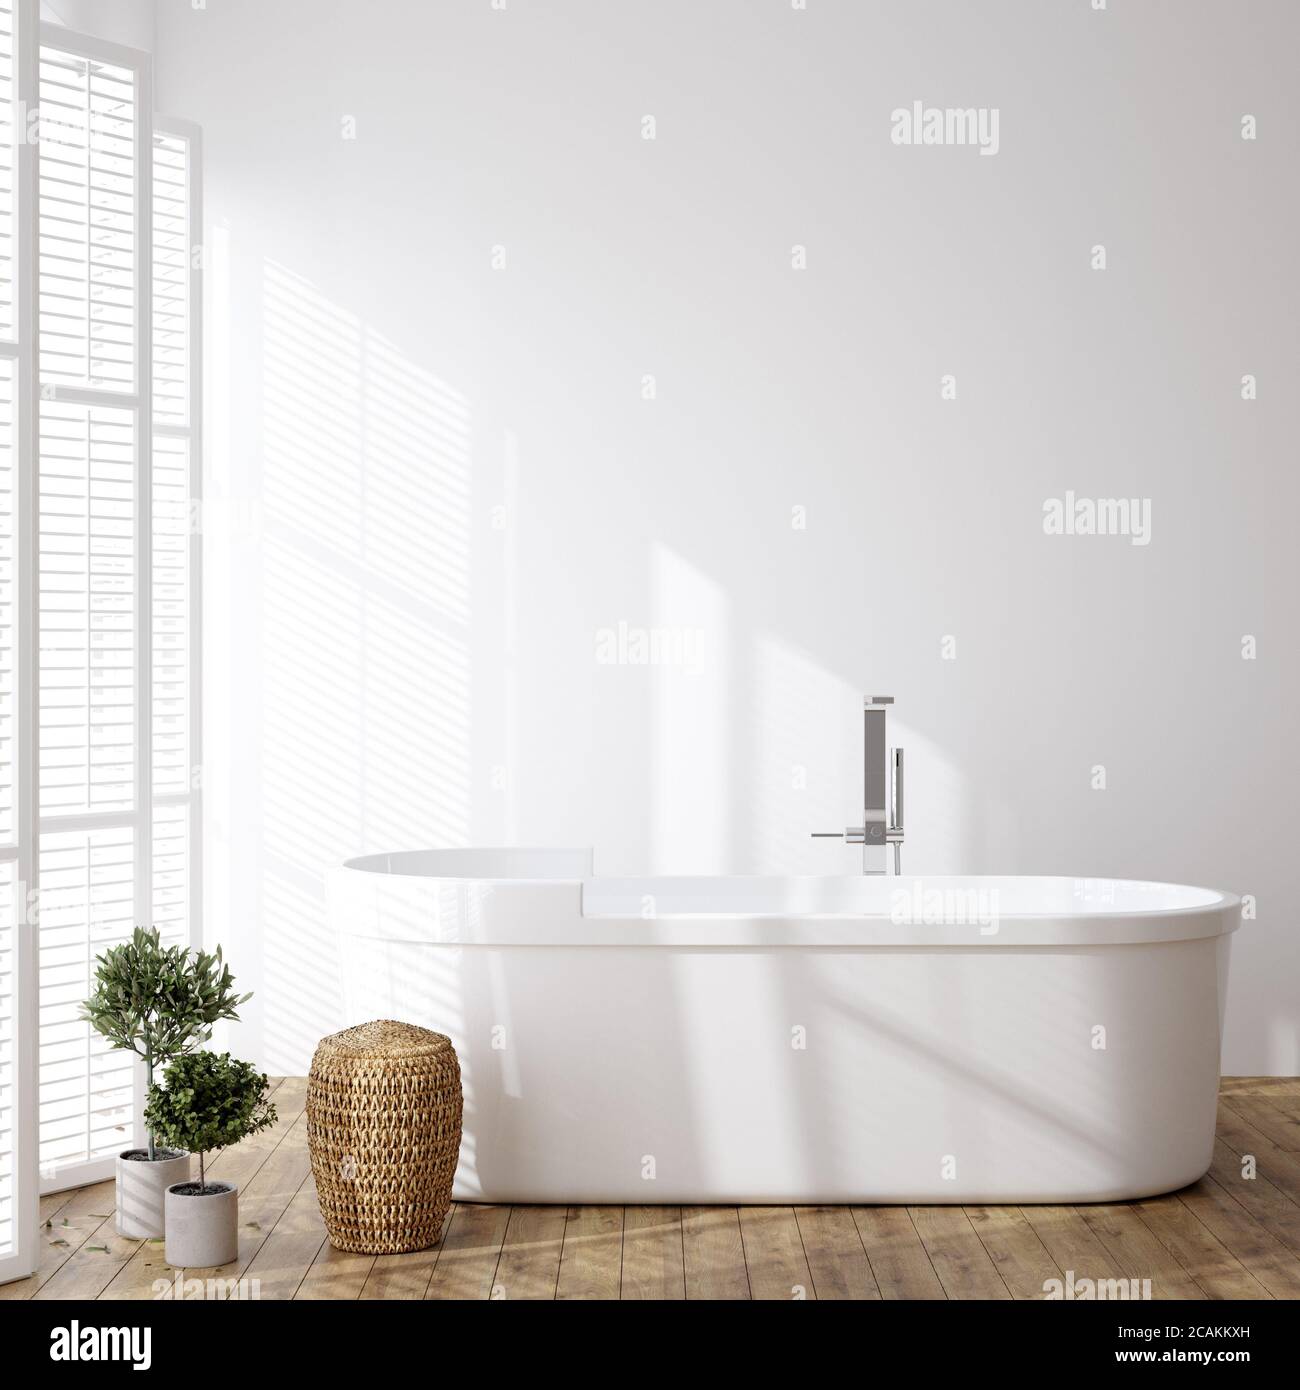 Download Simple Cozy Bathroom Interior Background Wall Mockup 3d Render Stock Photo Alamy